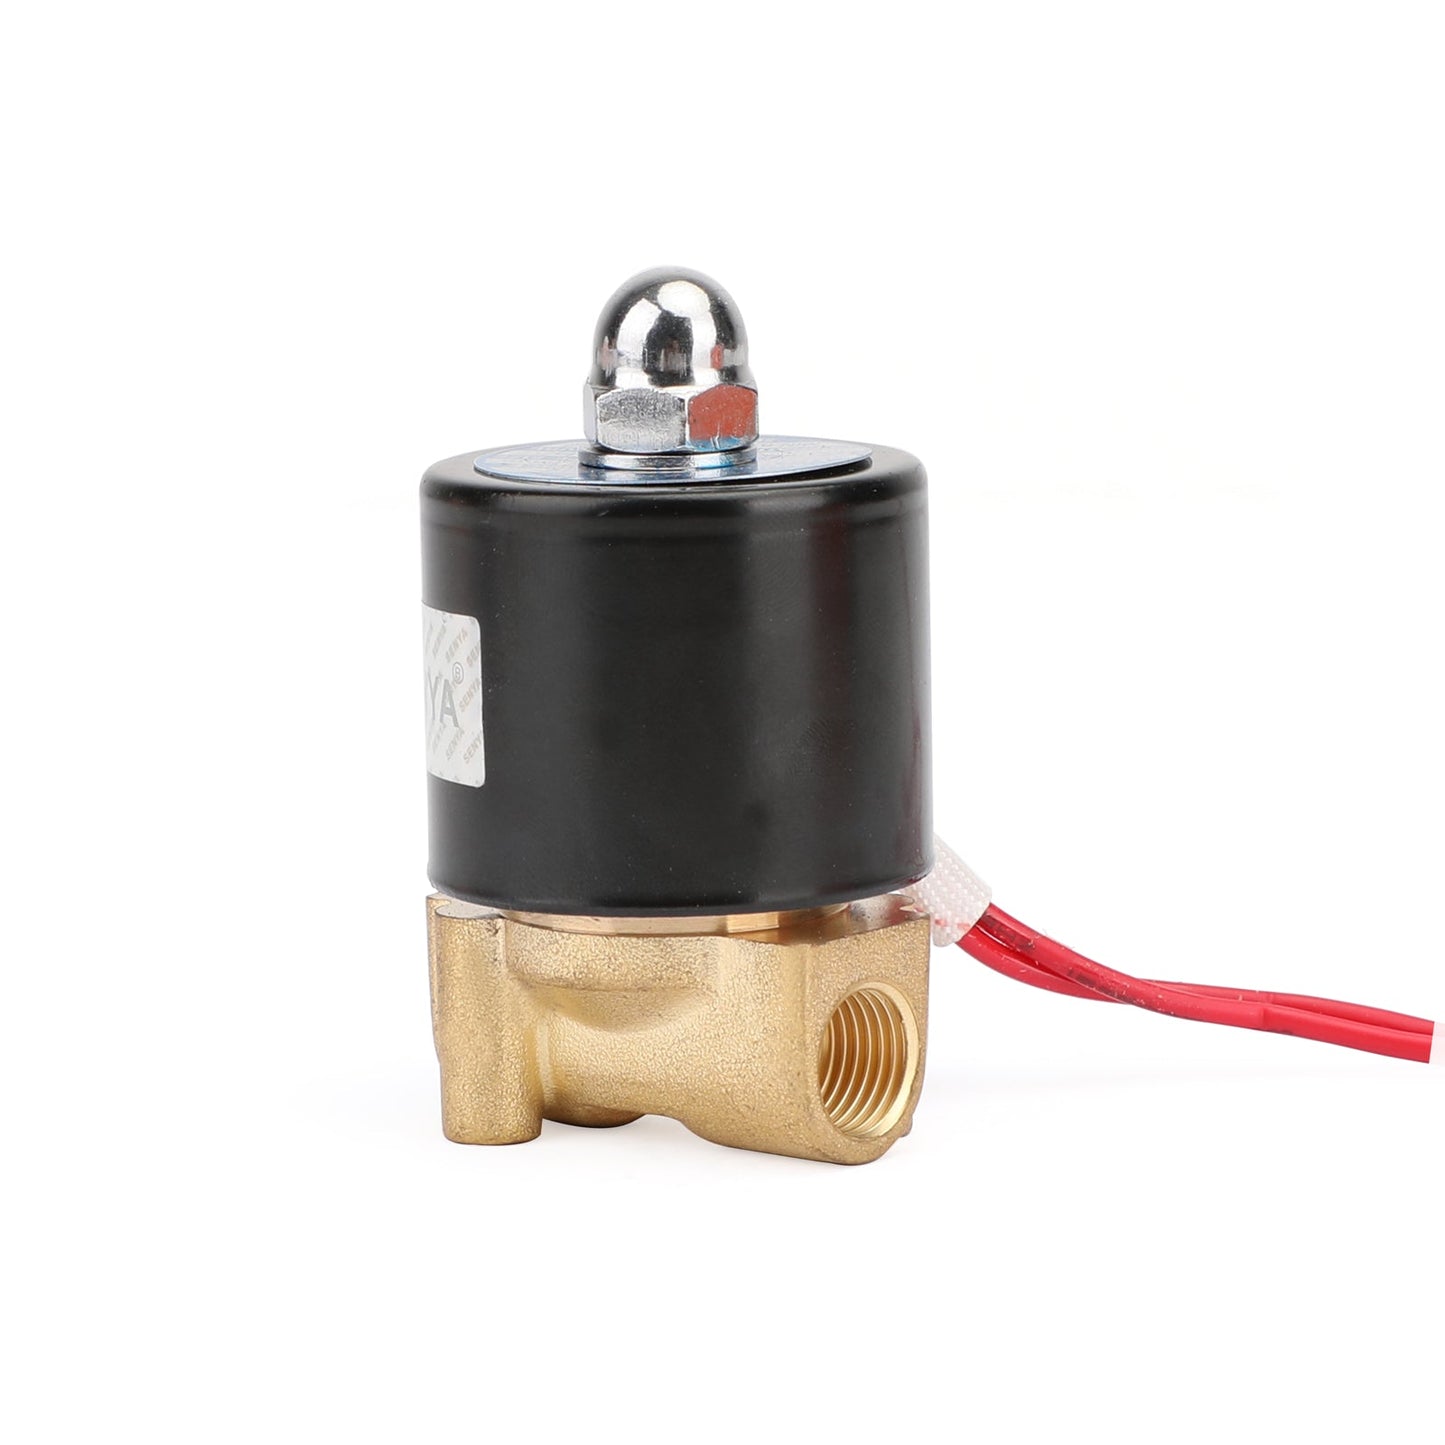 1/4" AC 220V Brass Normally Closed Electric Solenoid Valve BSP Gas Water Air N/C